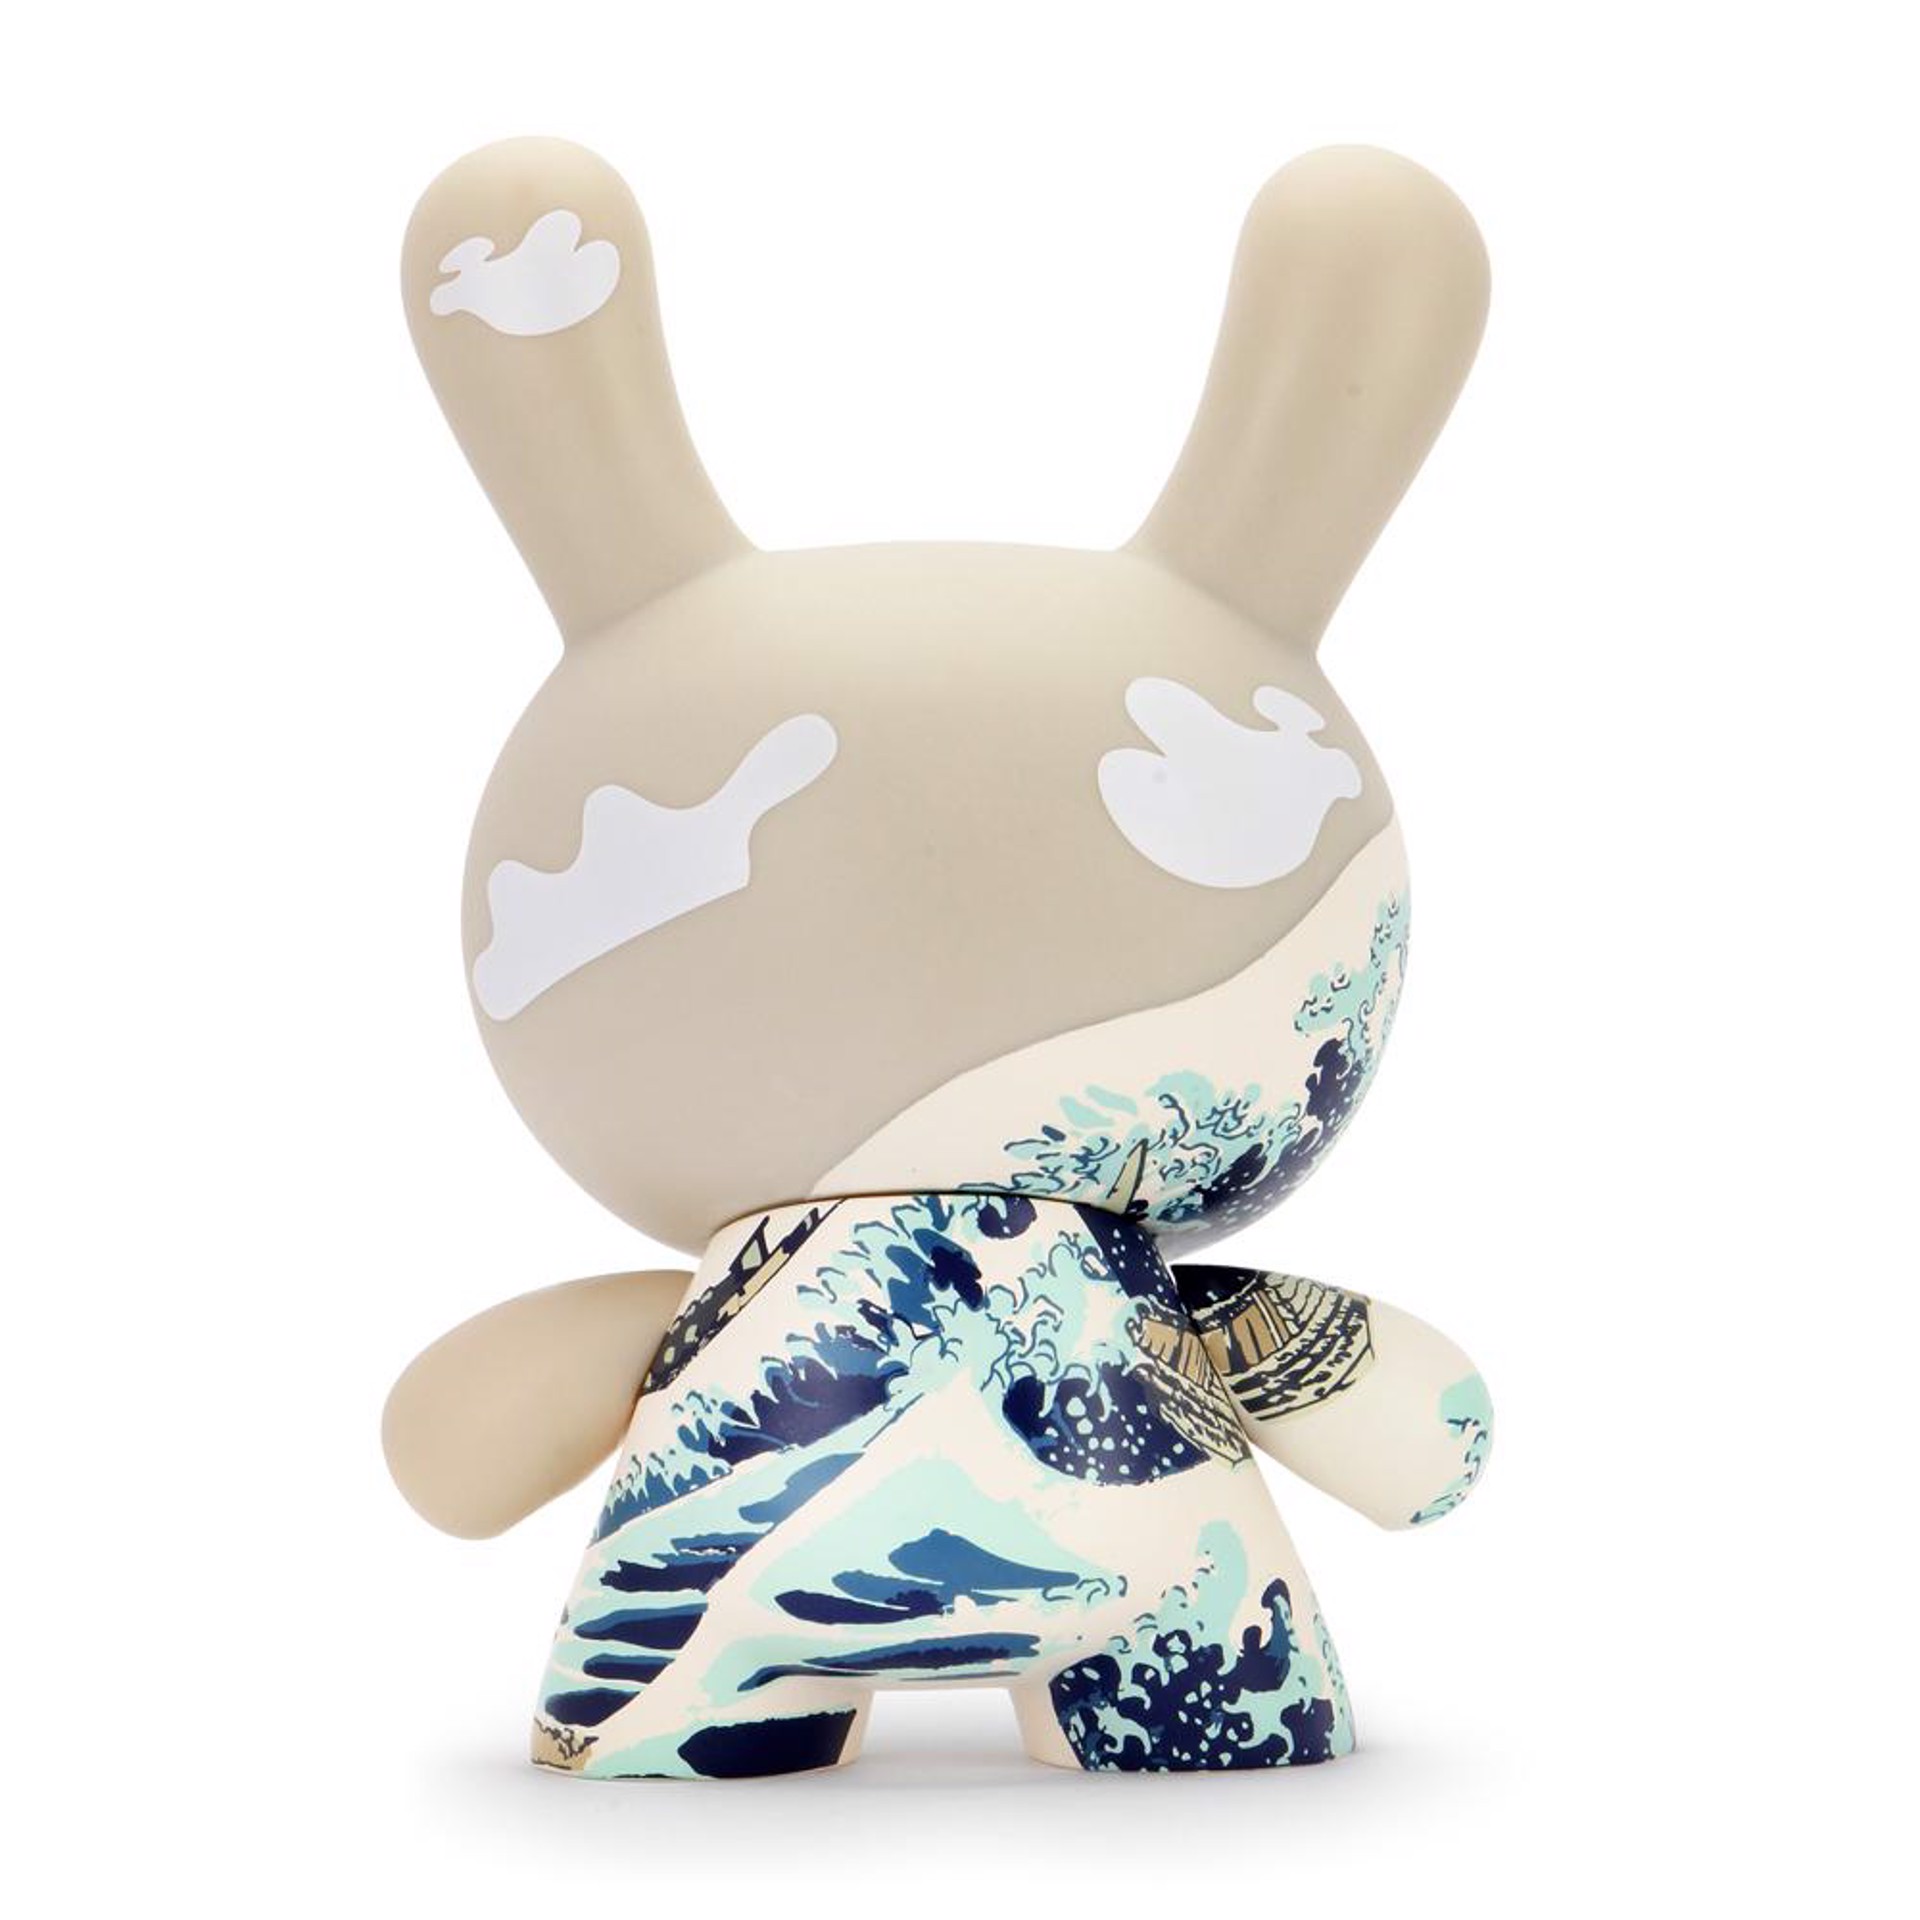 The  MET 8" Masterpiece Dunny-Hokusai Great Wave